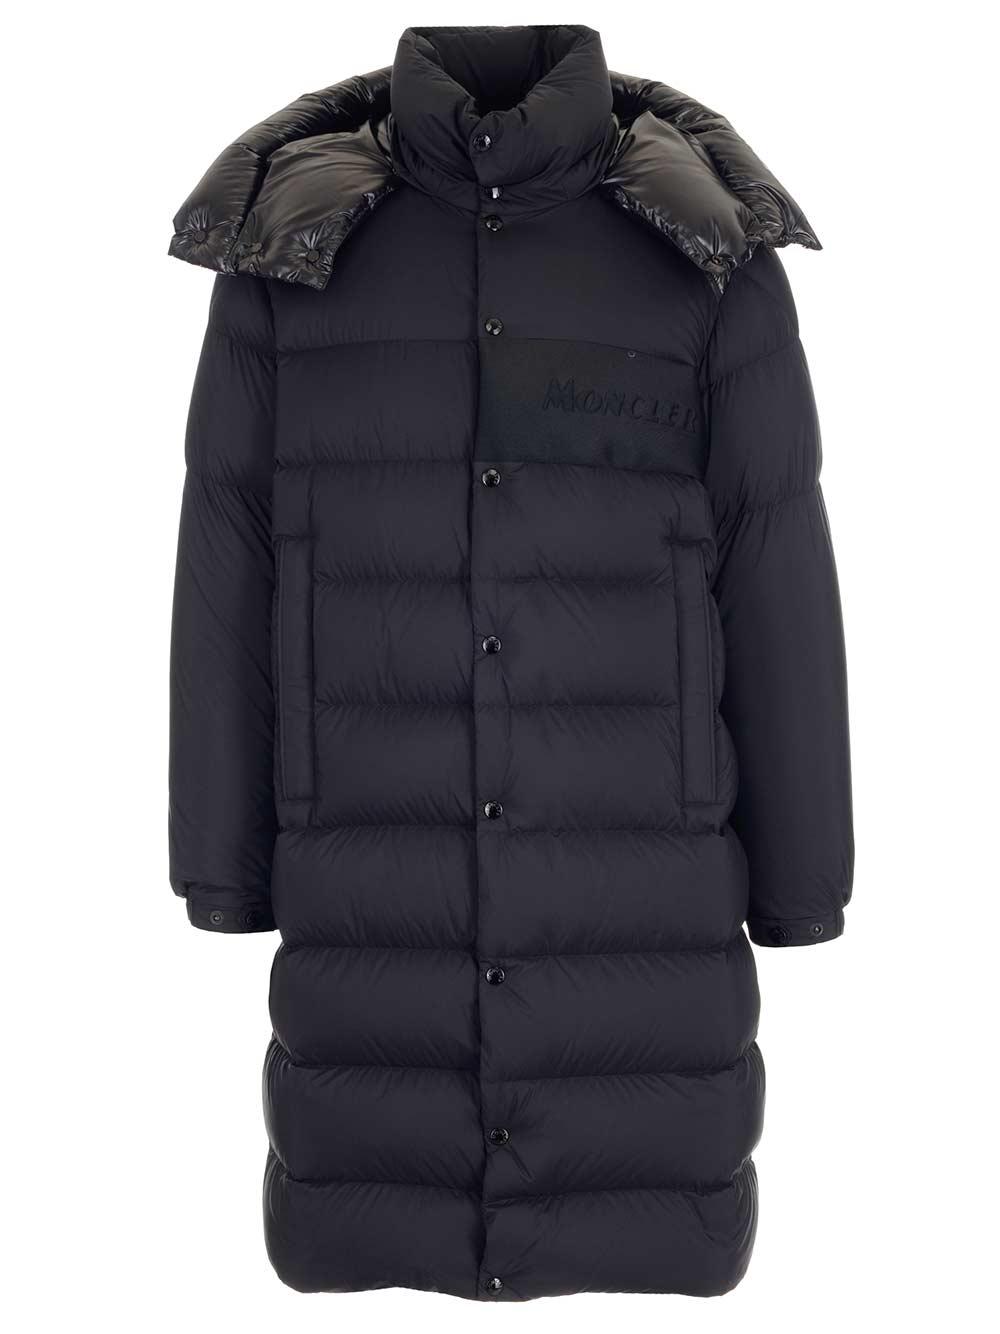 Moncler Synthetic Padded Long Down Coat in Black for Men - Lyst